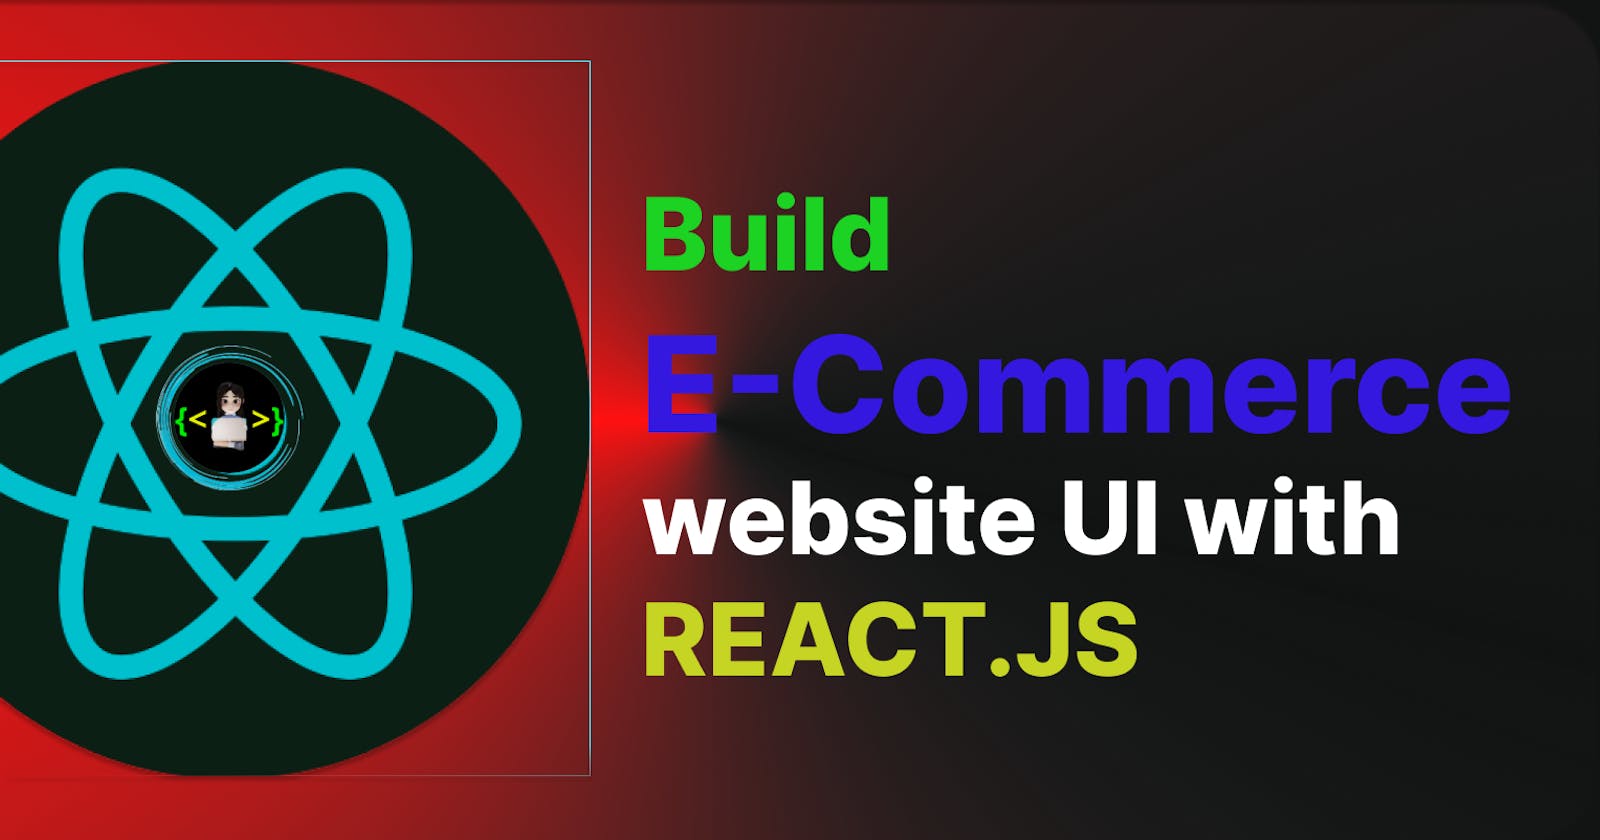 🎯Build E-commerce website UI with REACT.JS & Tailwind CSS🚀